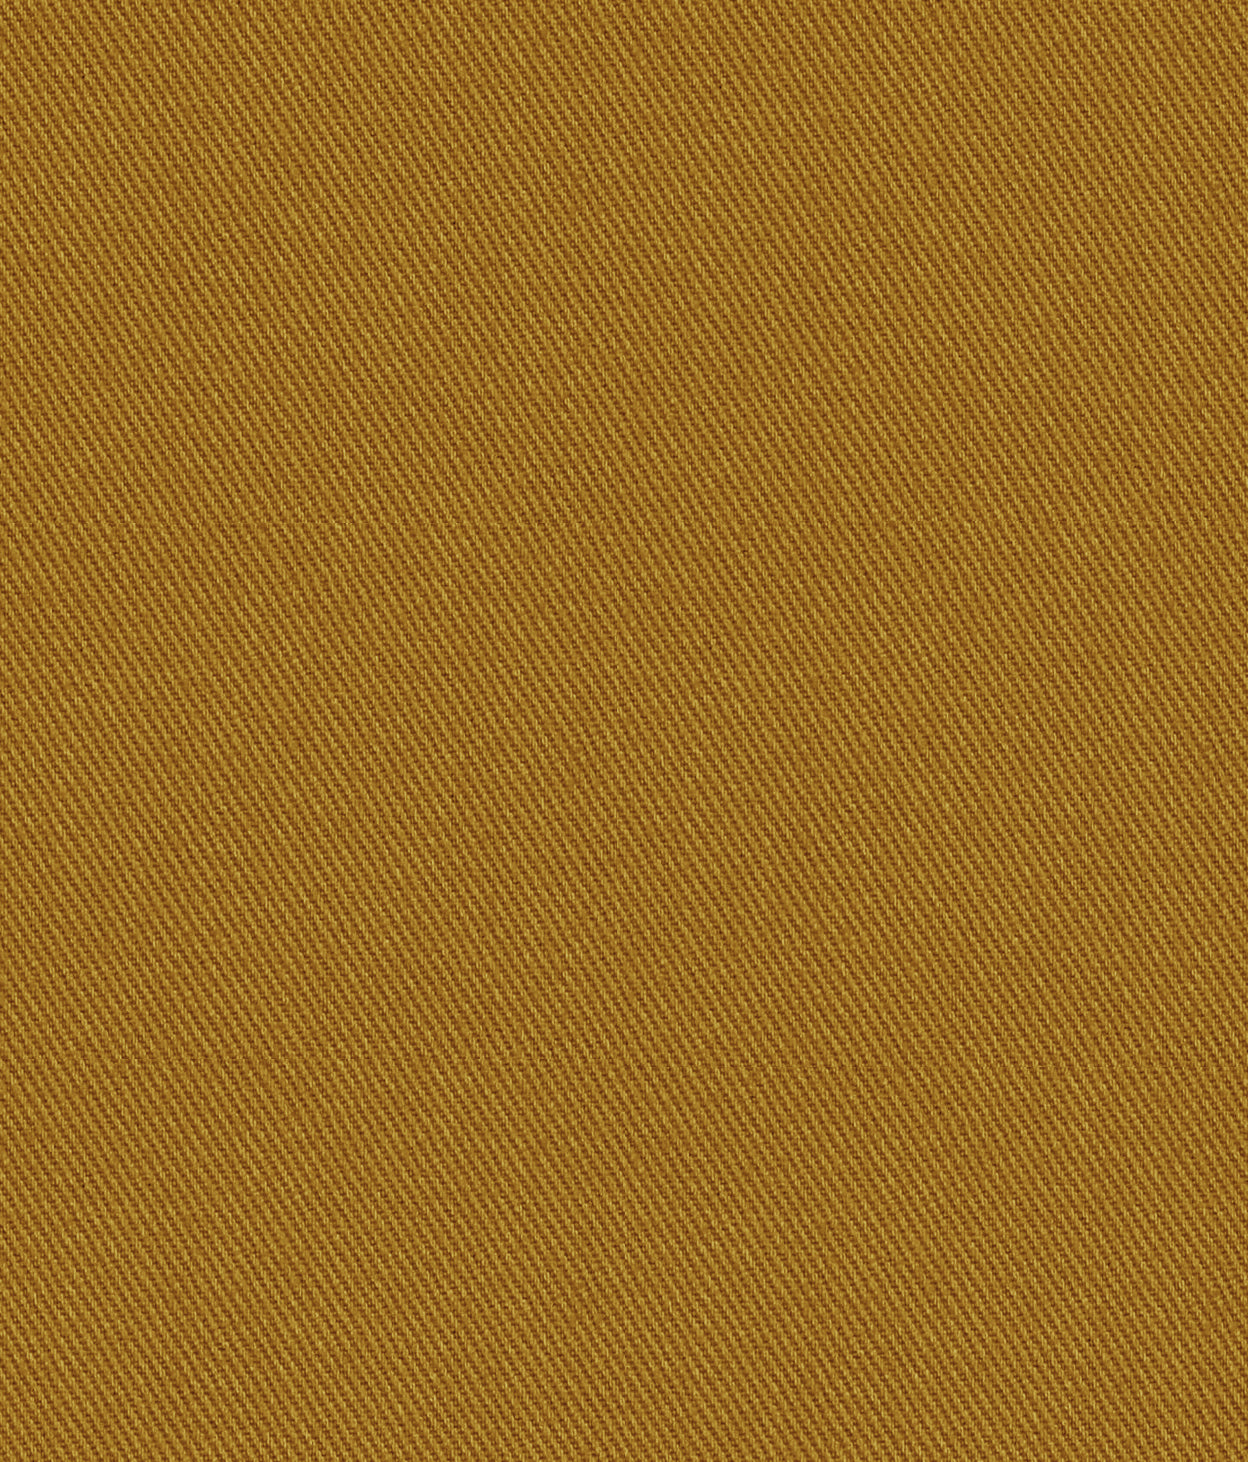 Cotton Blend Fabric in Mustard